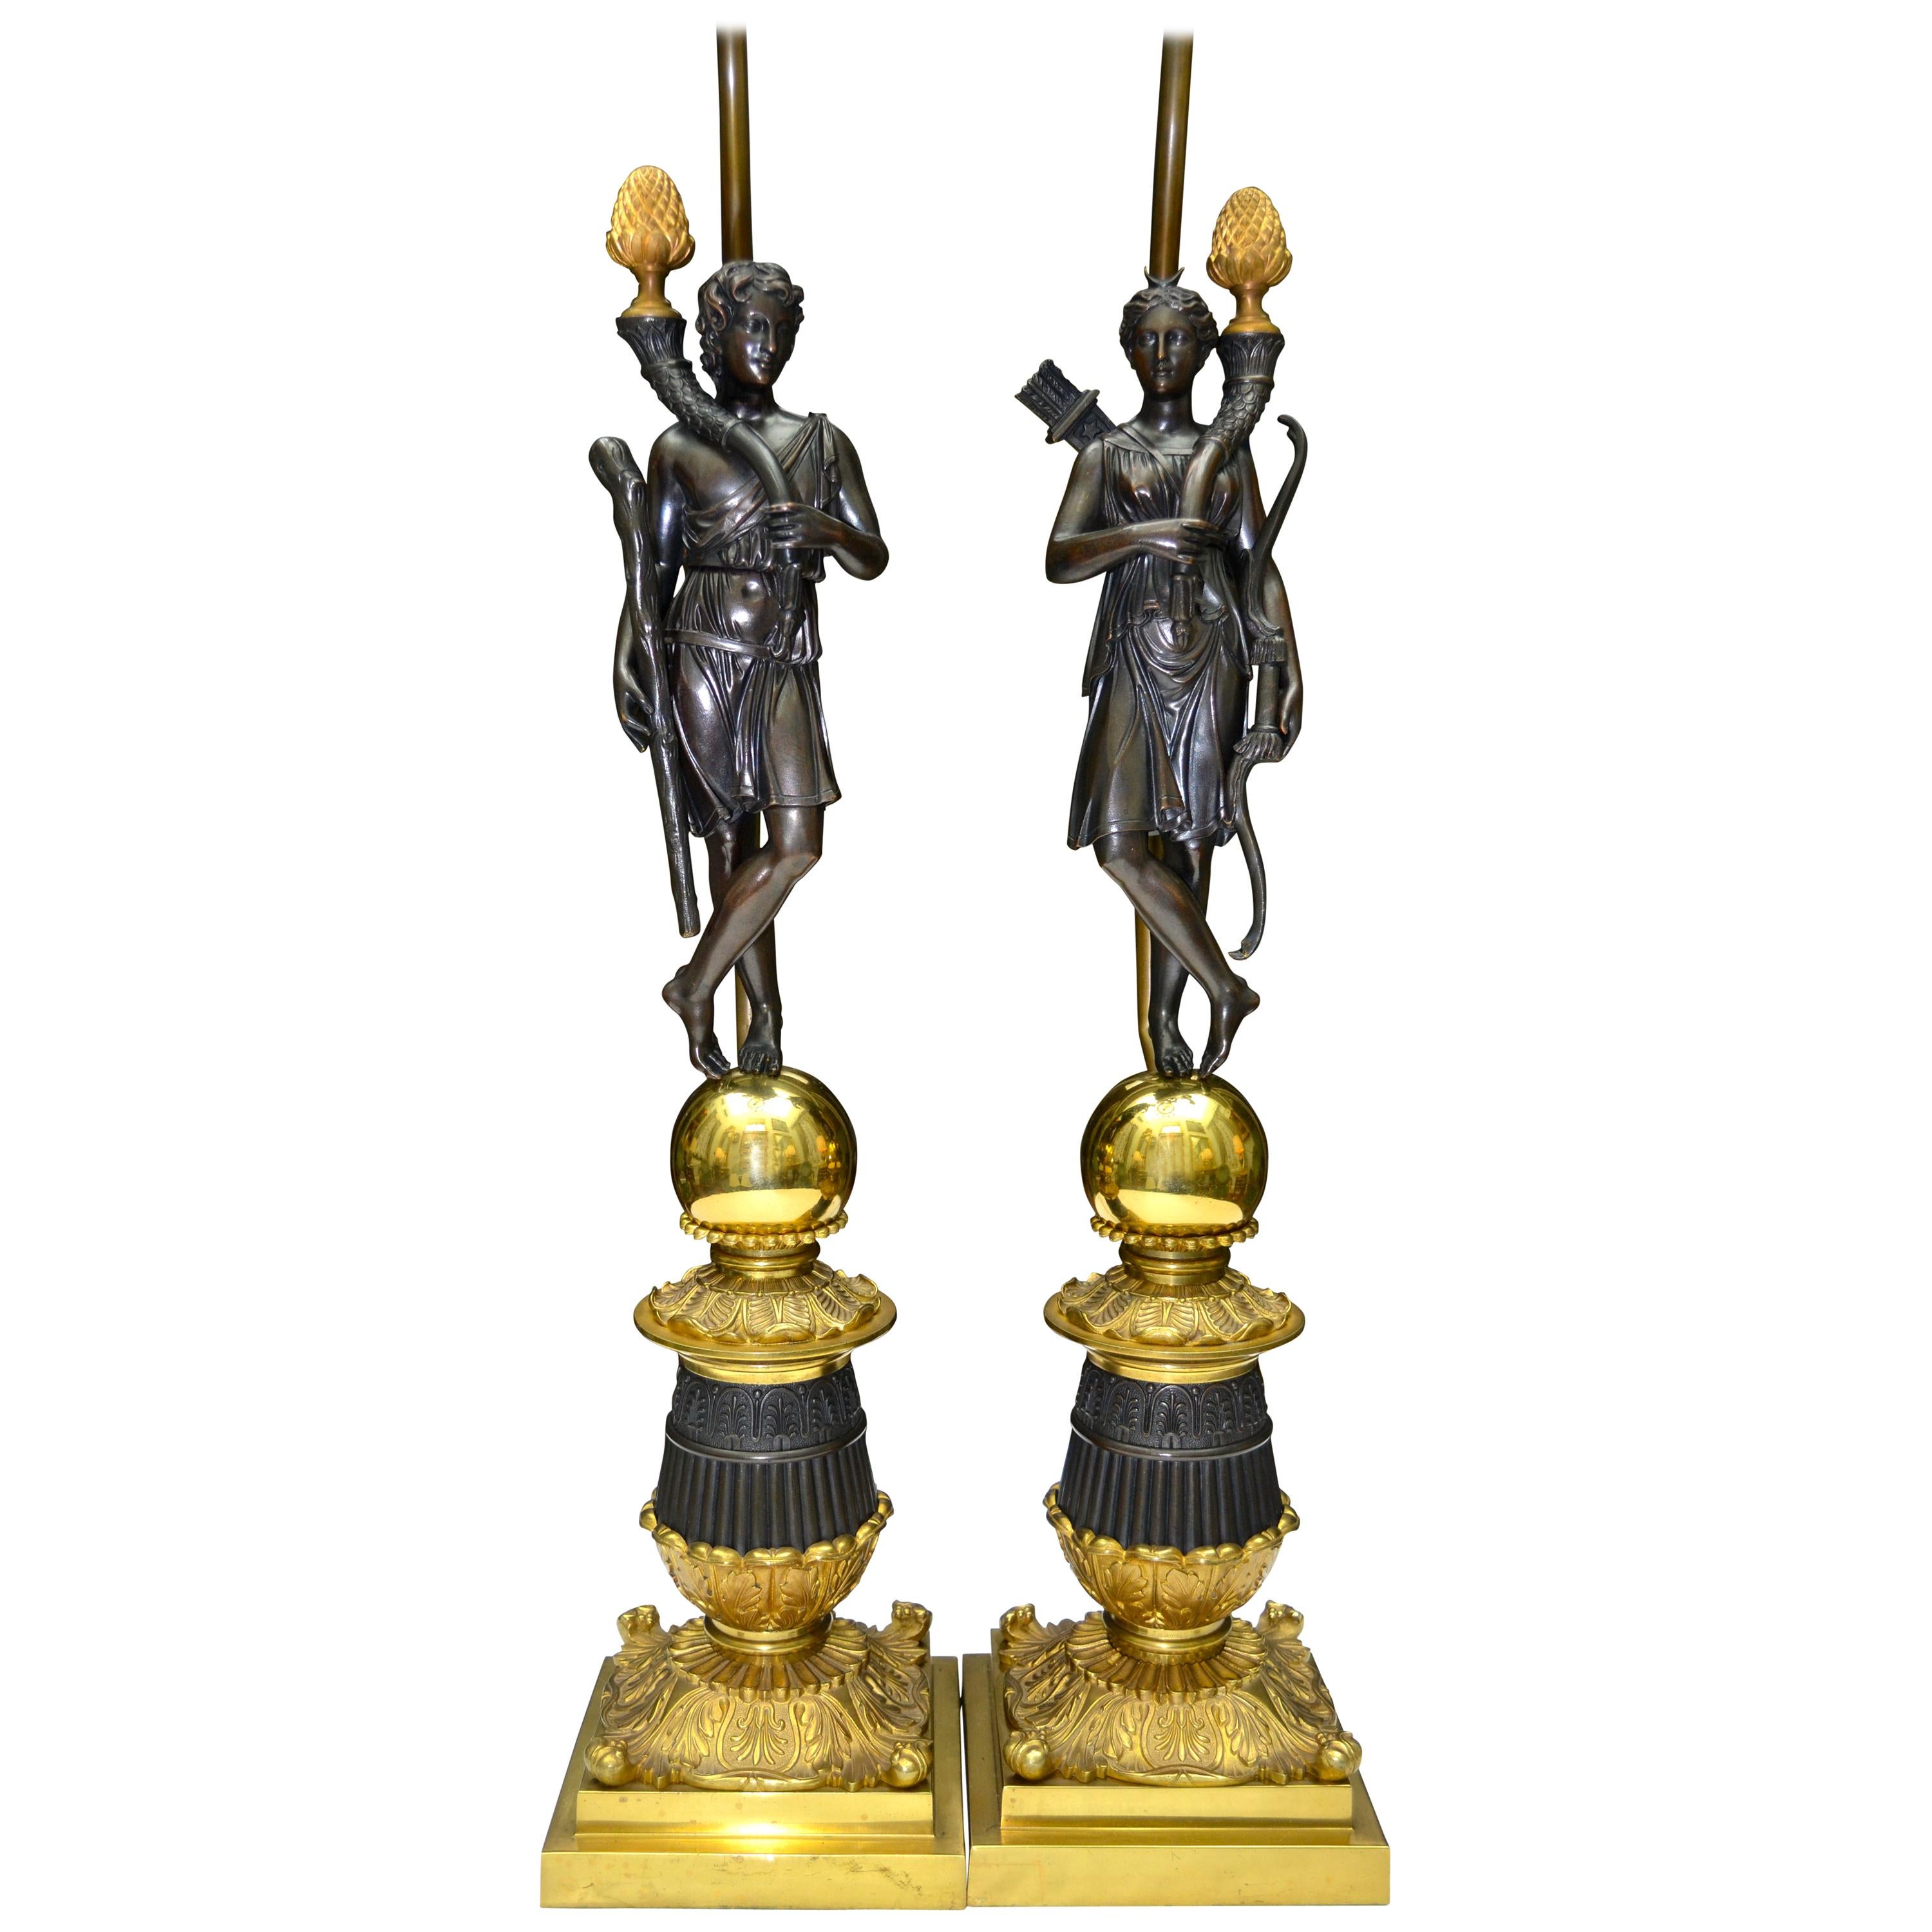 A pair of French restauration period figurative lamps bases featuring patinated bronze classically draped standing figures one representing Diana with her trademark bow and quiver of arrows, and the other a young Hercules with his club. Both are